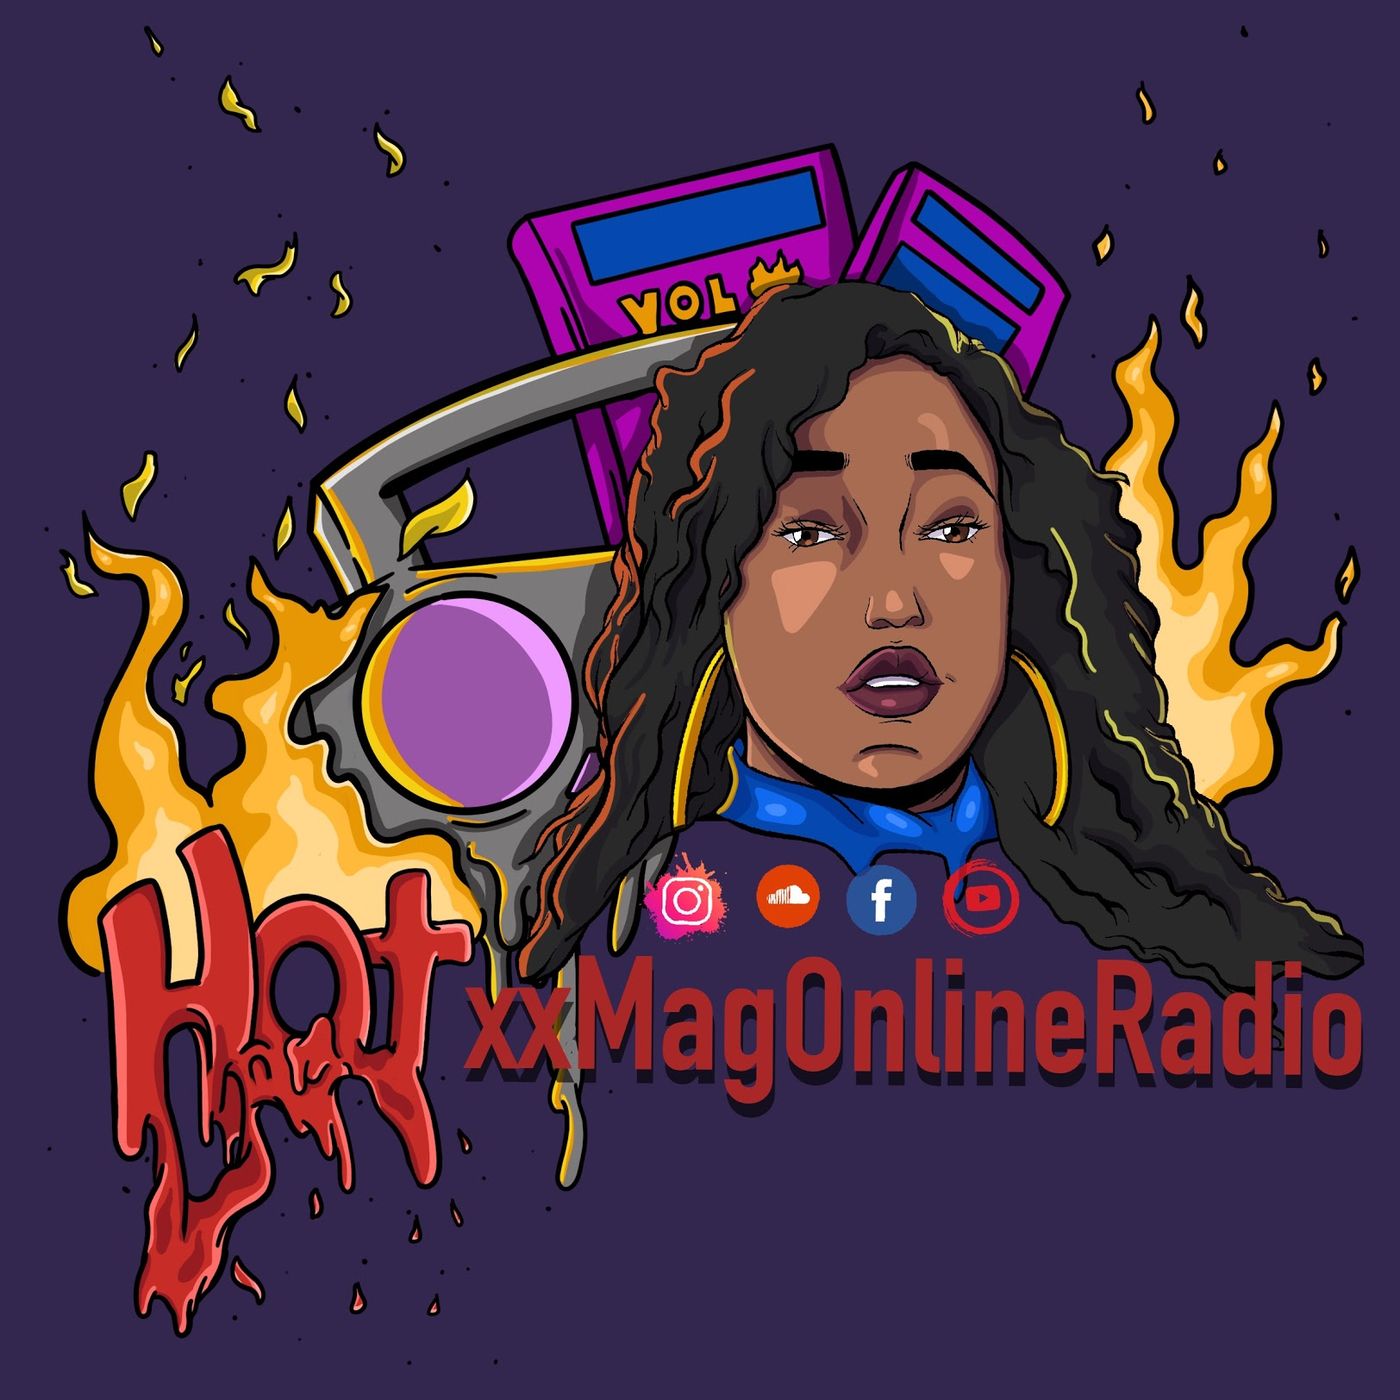 HotxxMagOnlineRadio Interview With 220 phactz + Music | Hosted By Tara J